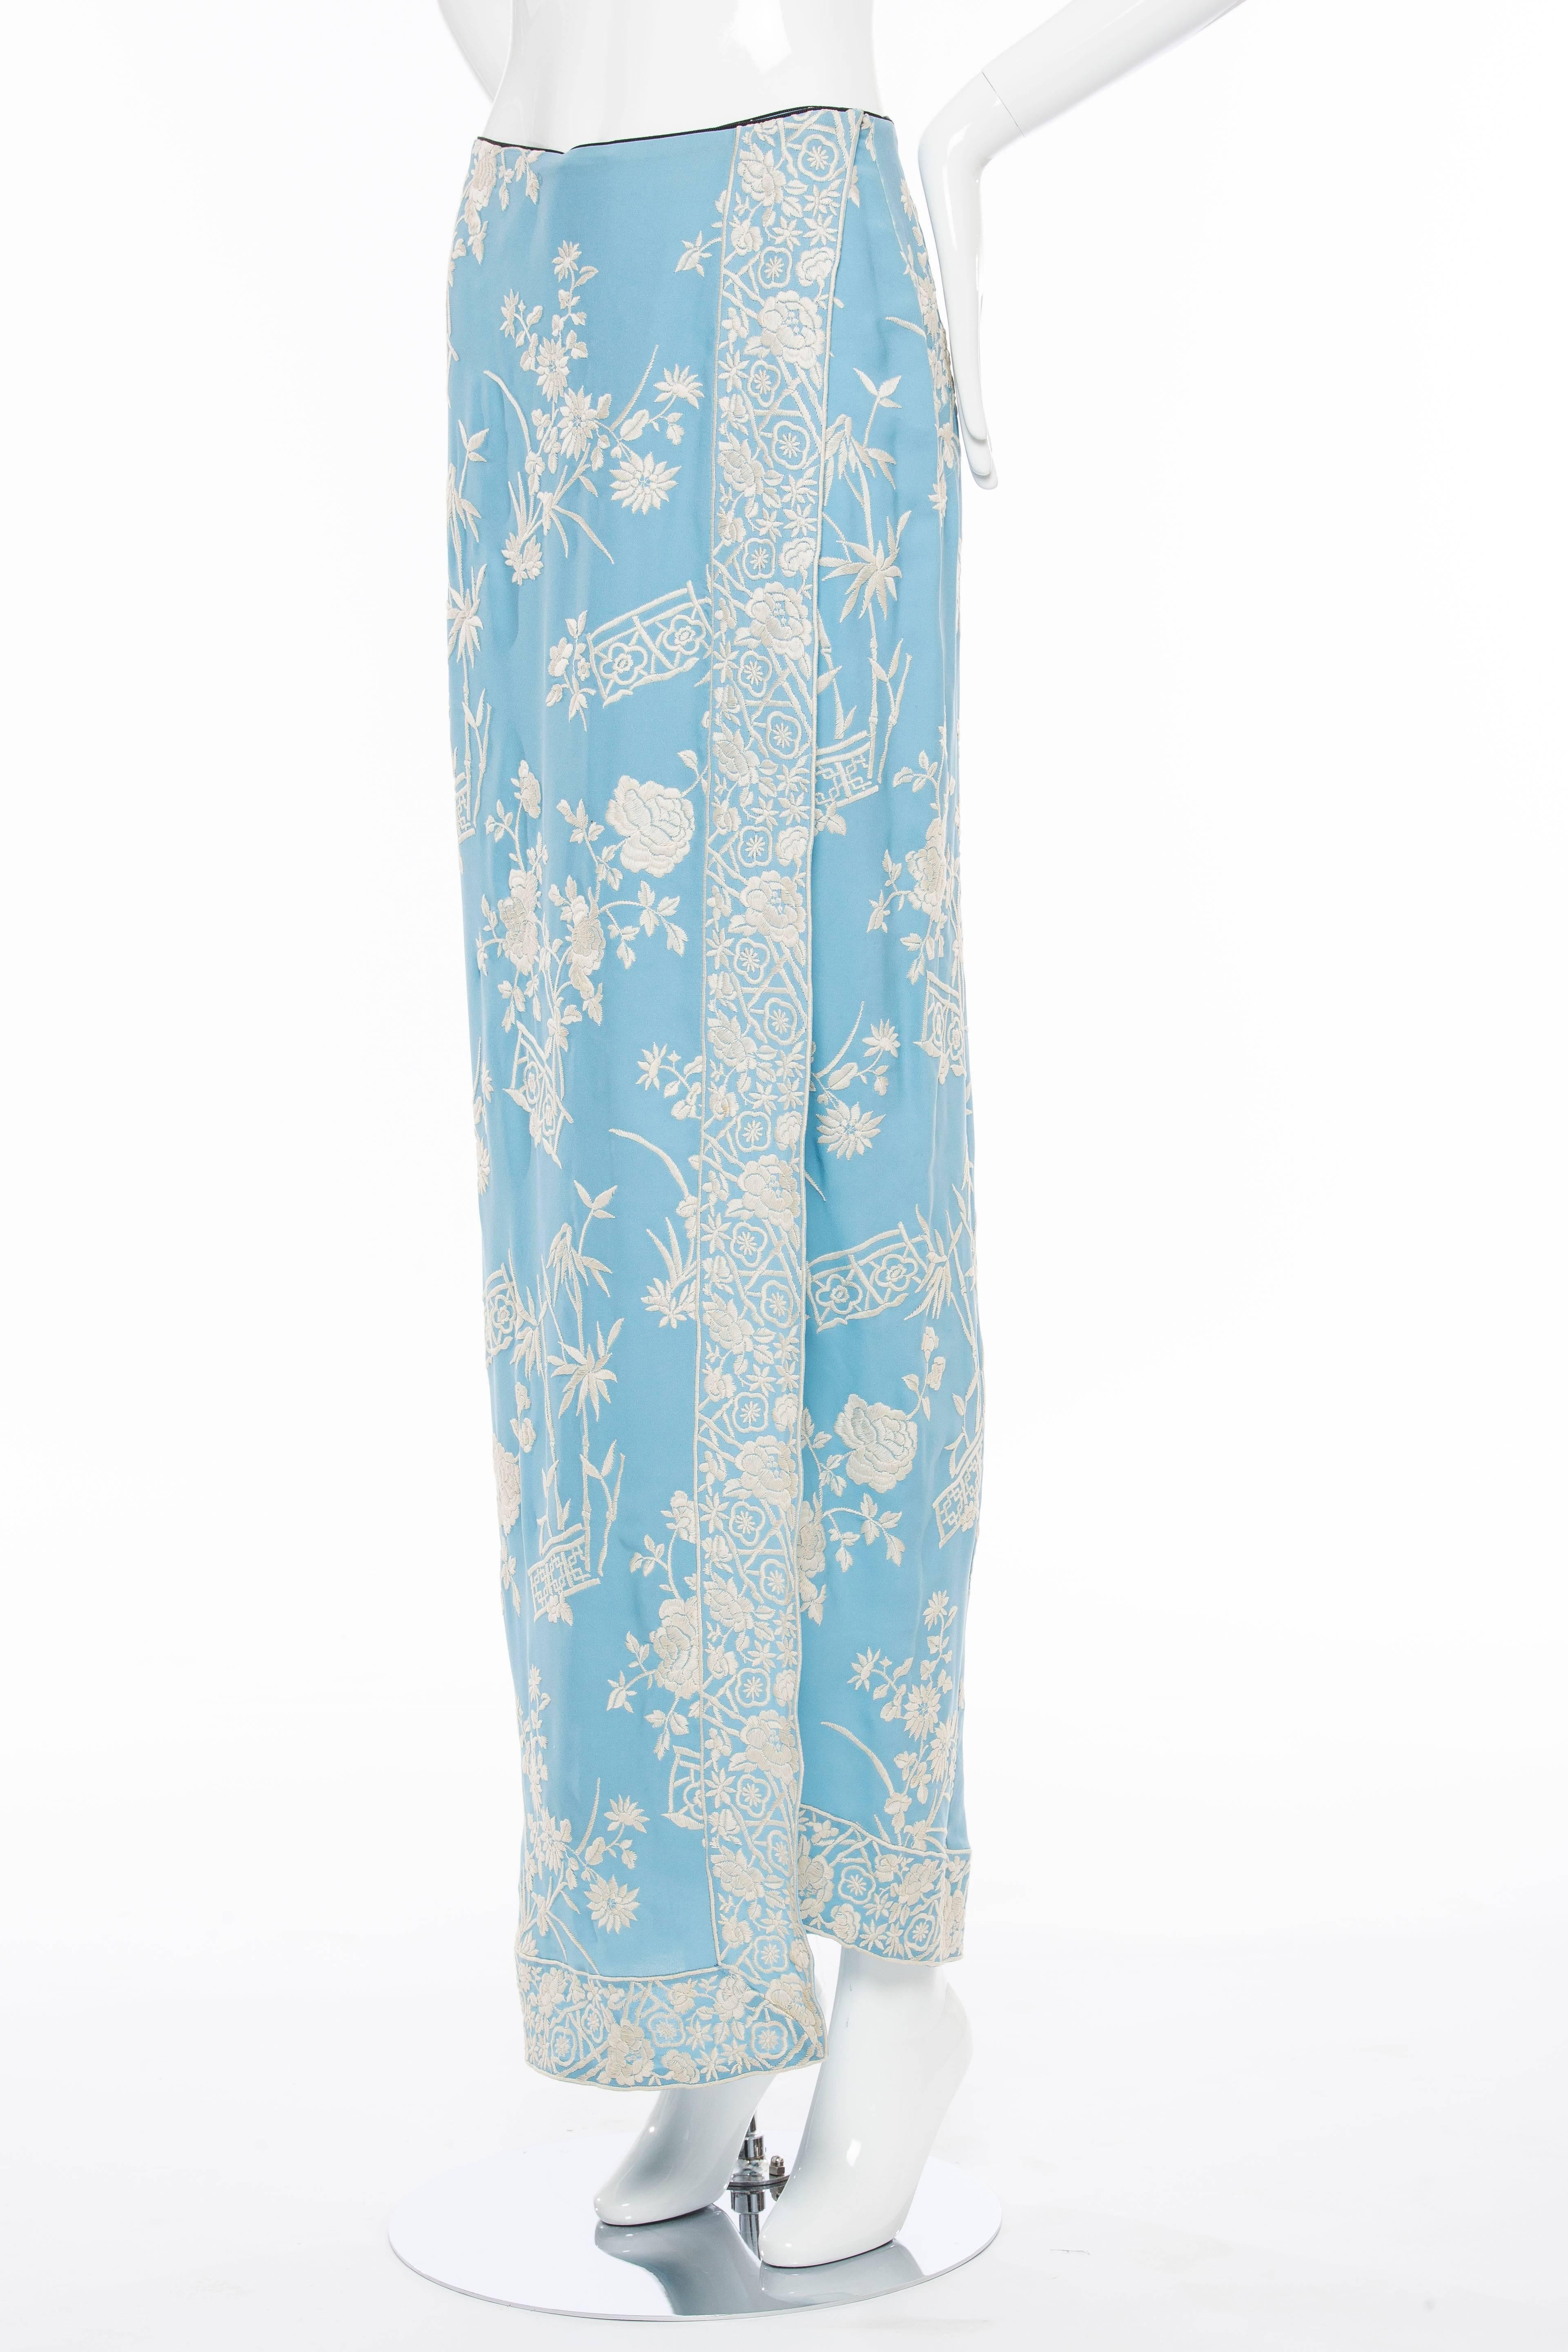 Dolce & Gabbana, Spring/Summer, circa 1997  China Collection, silk wedgwood blue embroidered skirt with snap front.

Waist 26”, Hip 32”, Length 42”

IT. 42
US. 6